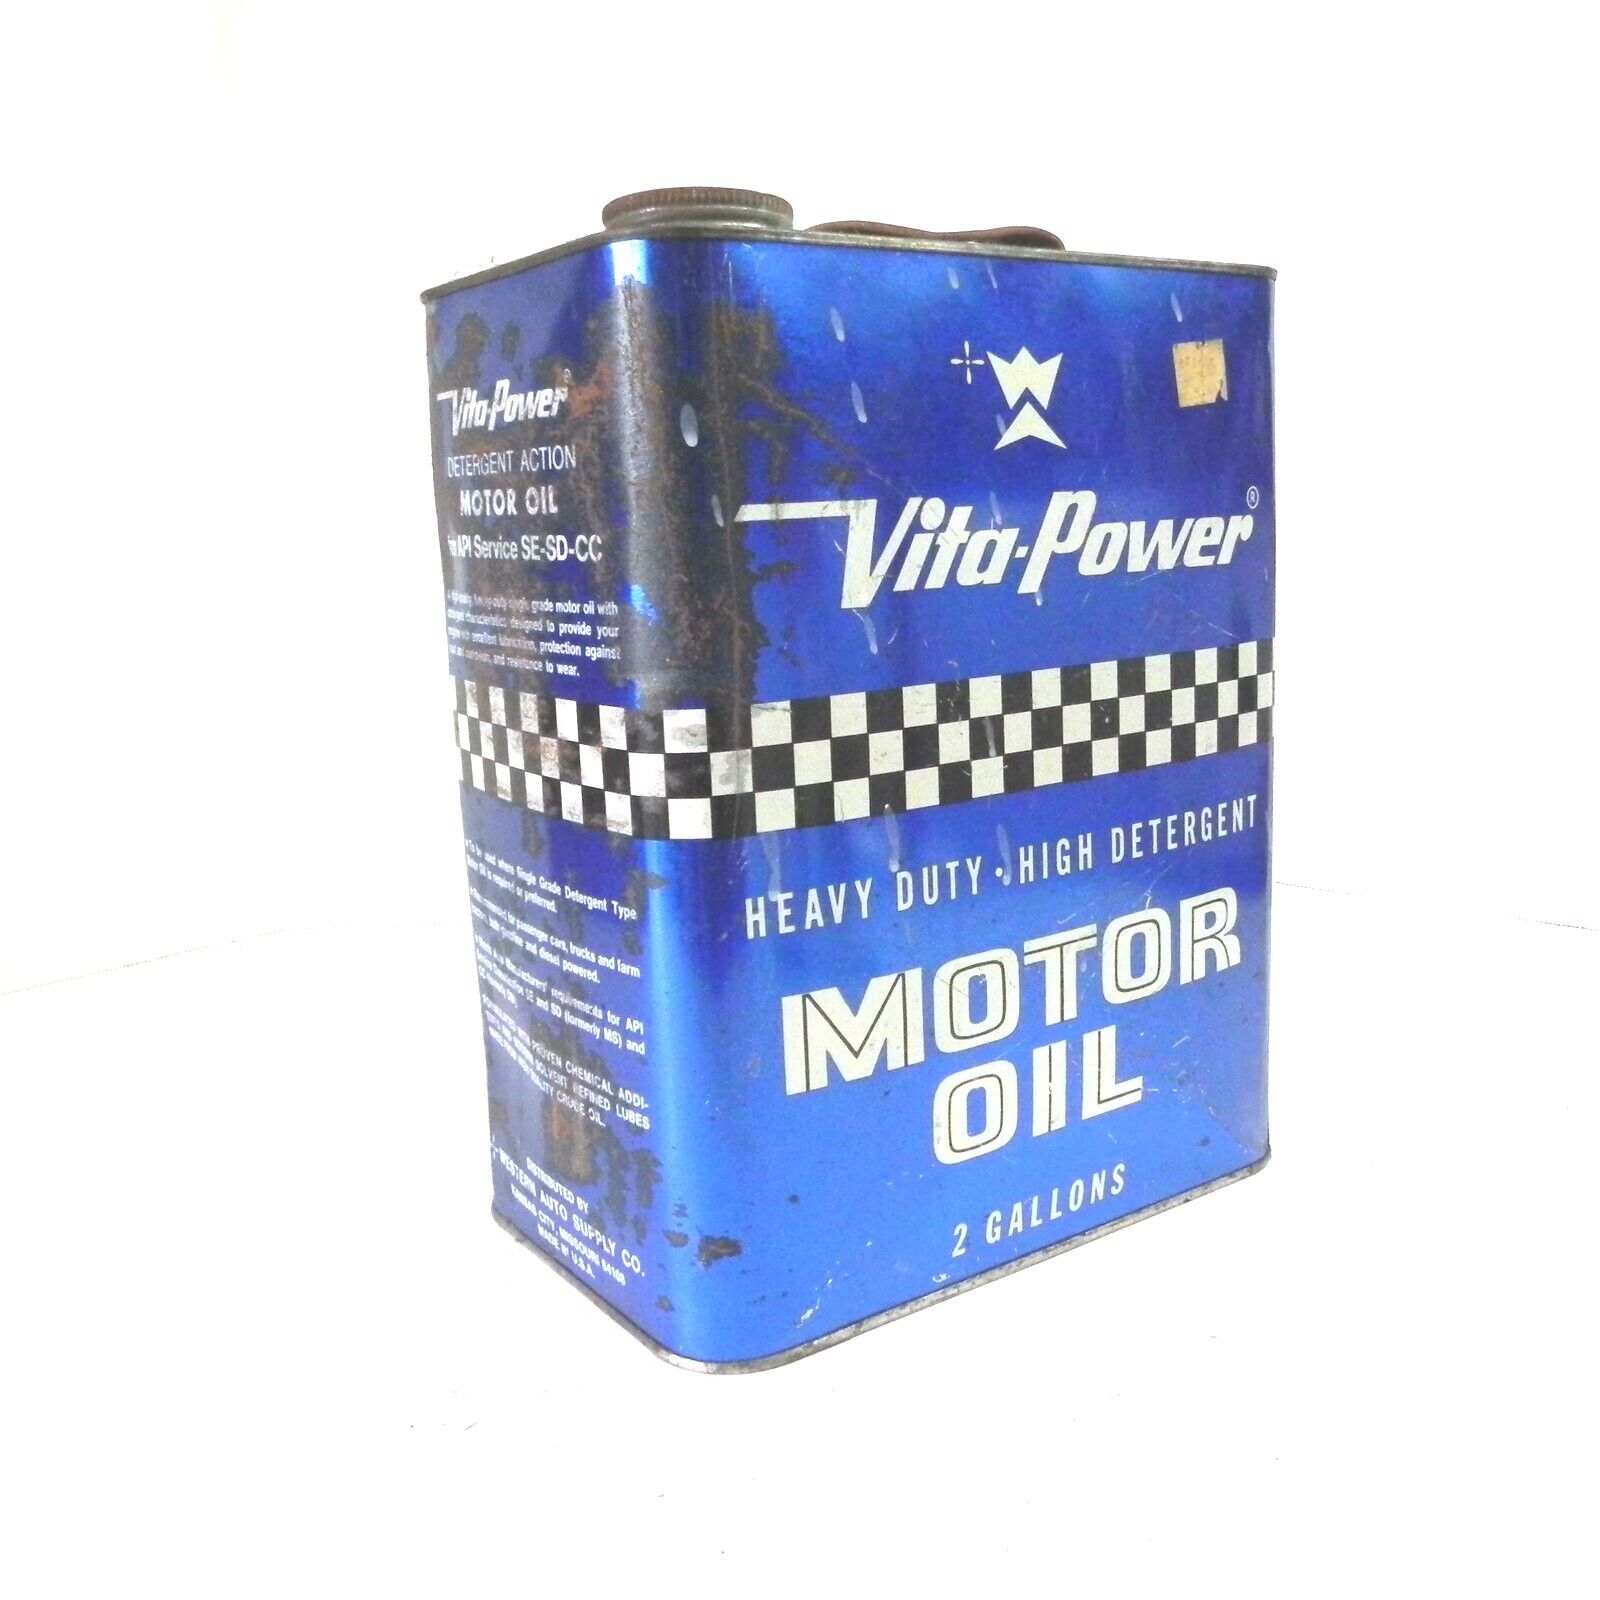 VINTAGE VITA-POWER HEAVY DUTY HIGH DETERGENT MOTOR OIL 2 GALLON CAN EMPTY USED 